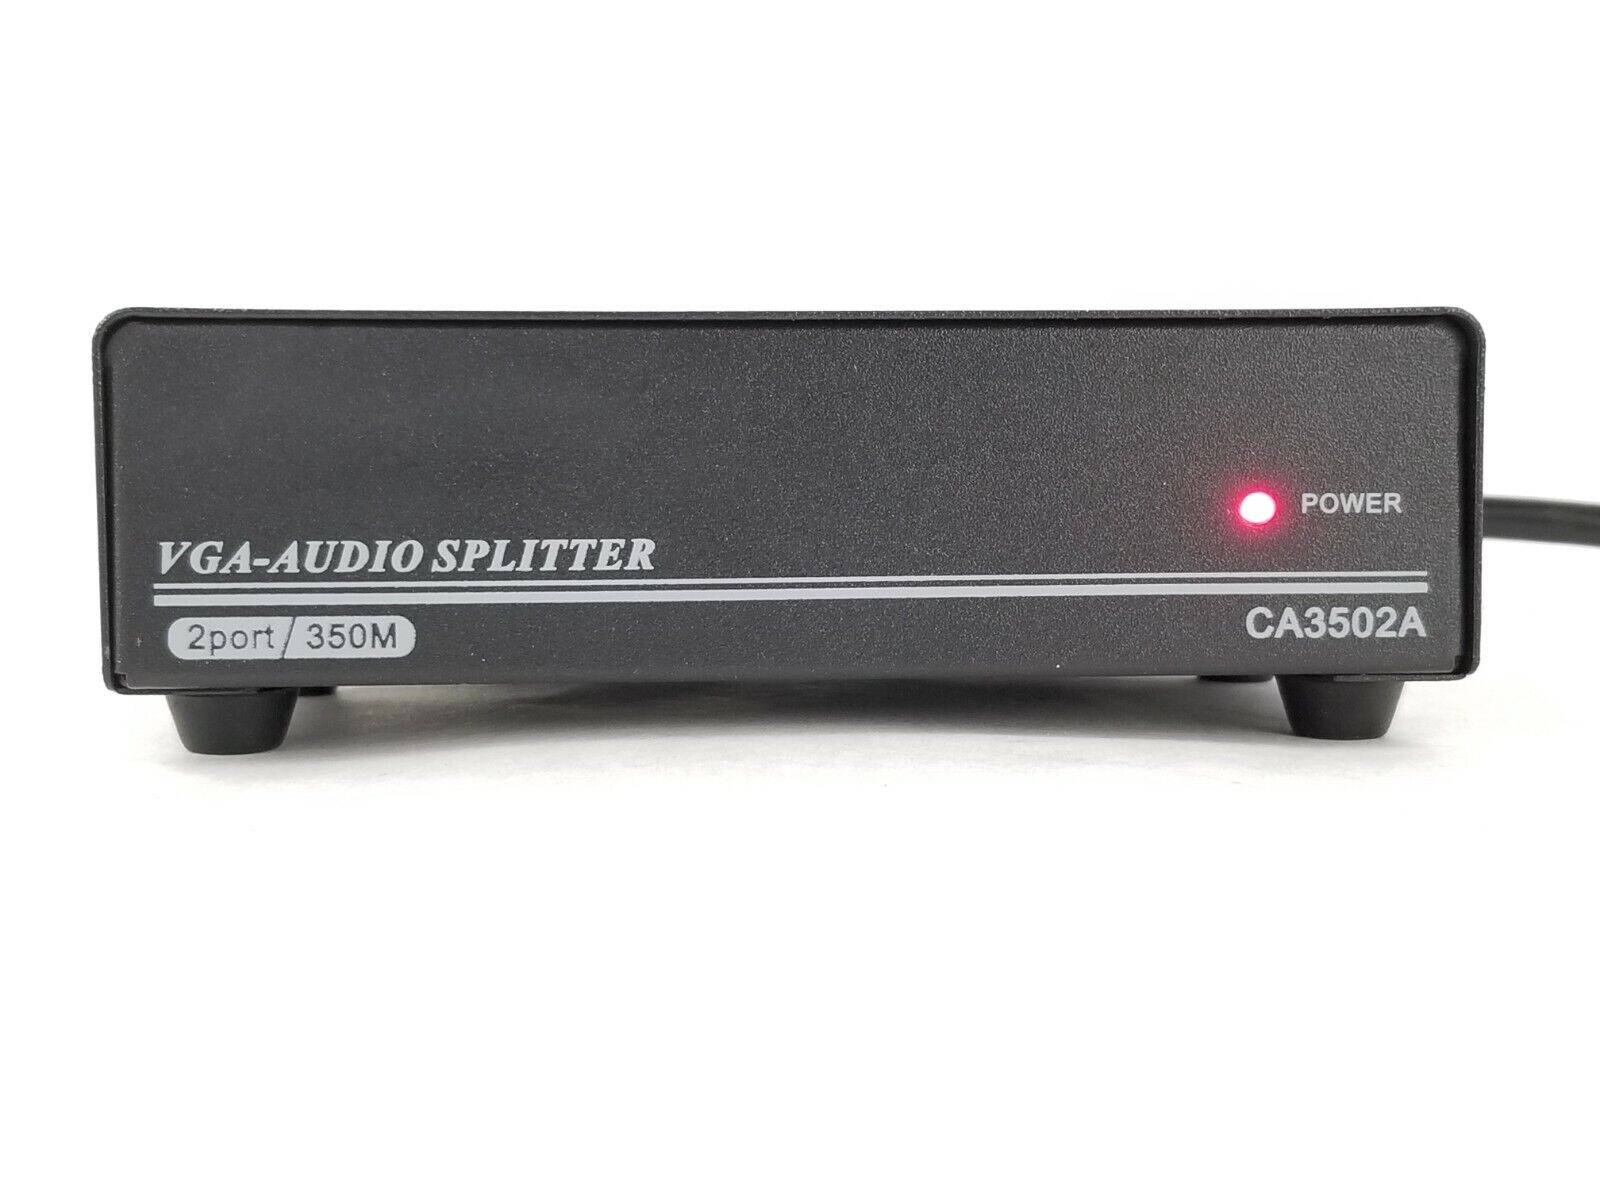 VGA-Audio Splitter, CA3502A With AC Adapter.